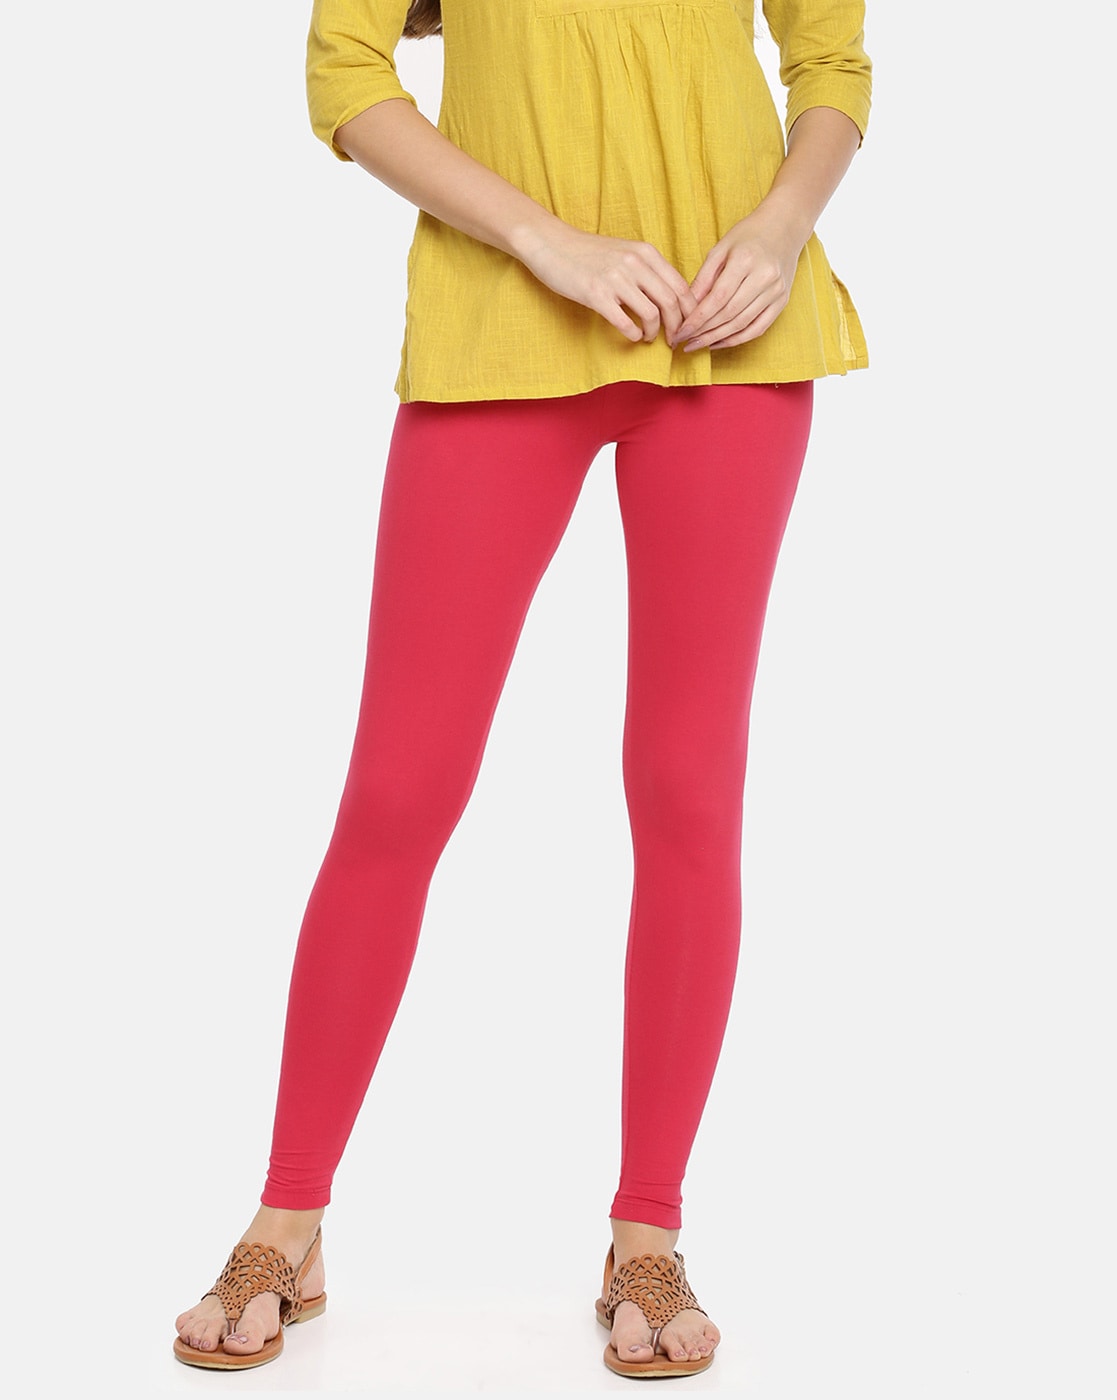 FashGlam Premium Ankle Length Leggings Combo - Red,Royal Blue,Baby Pink :  Amazon.in: Fashion